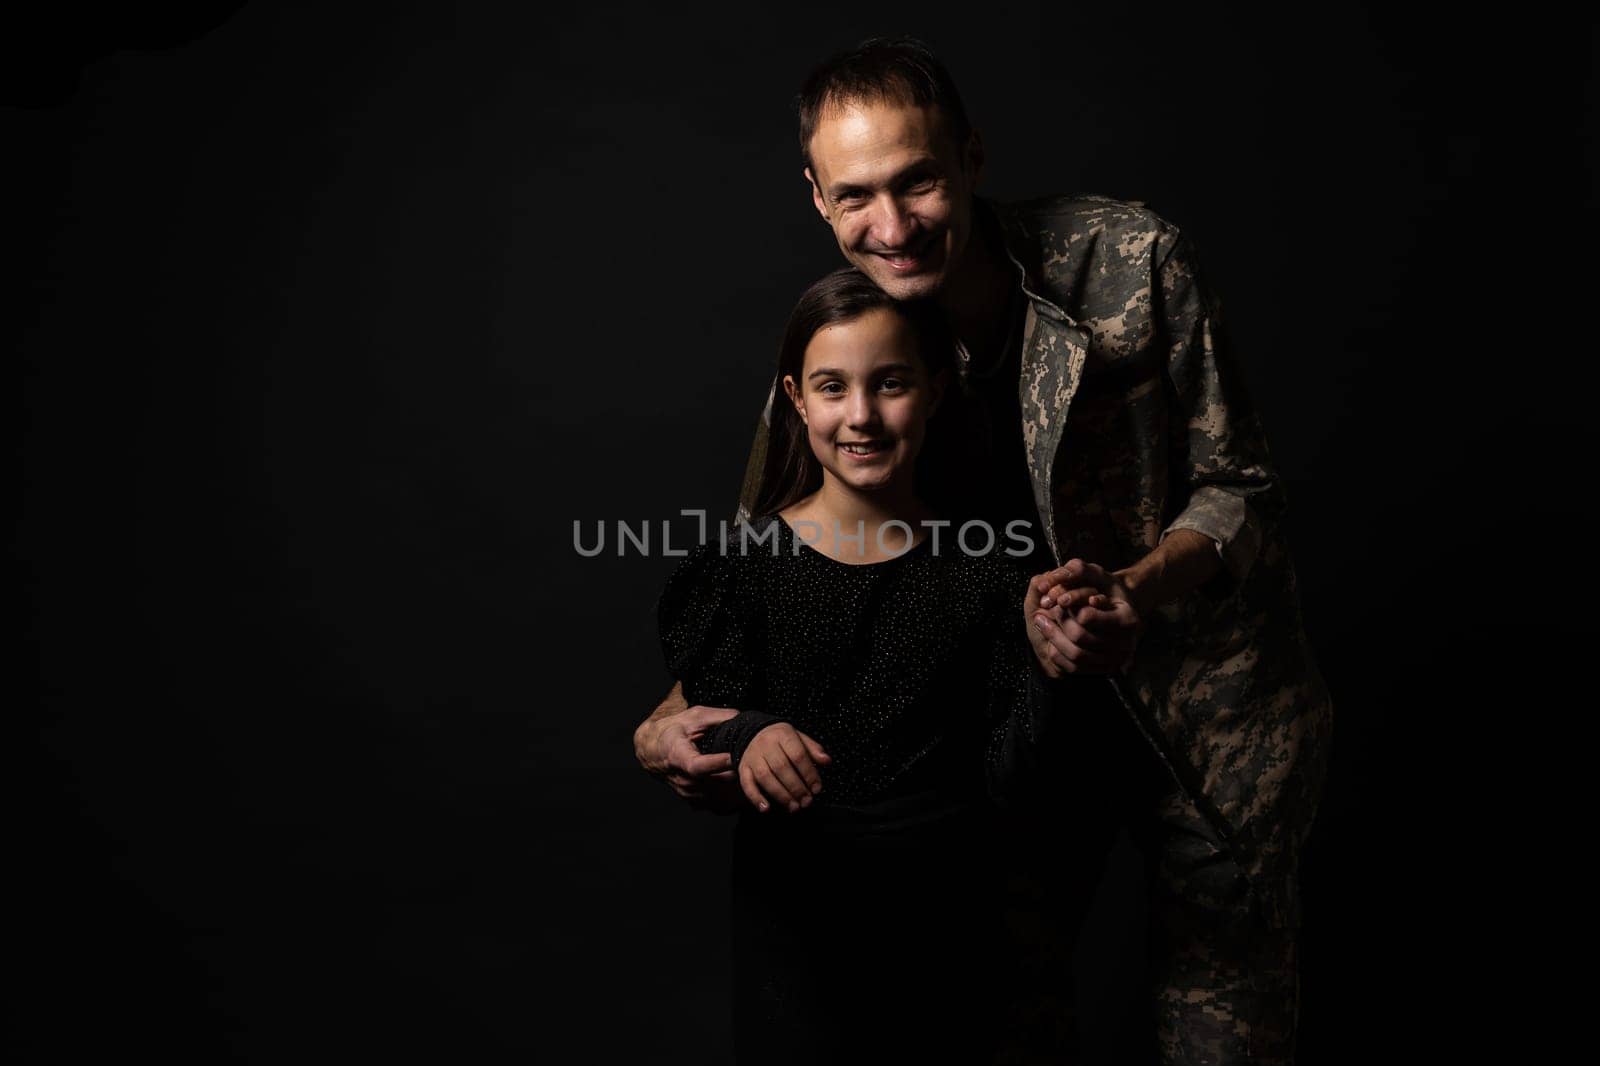 military man and daughter on a black background.